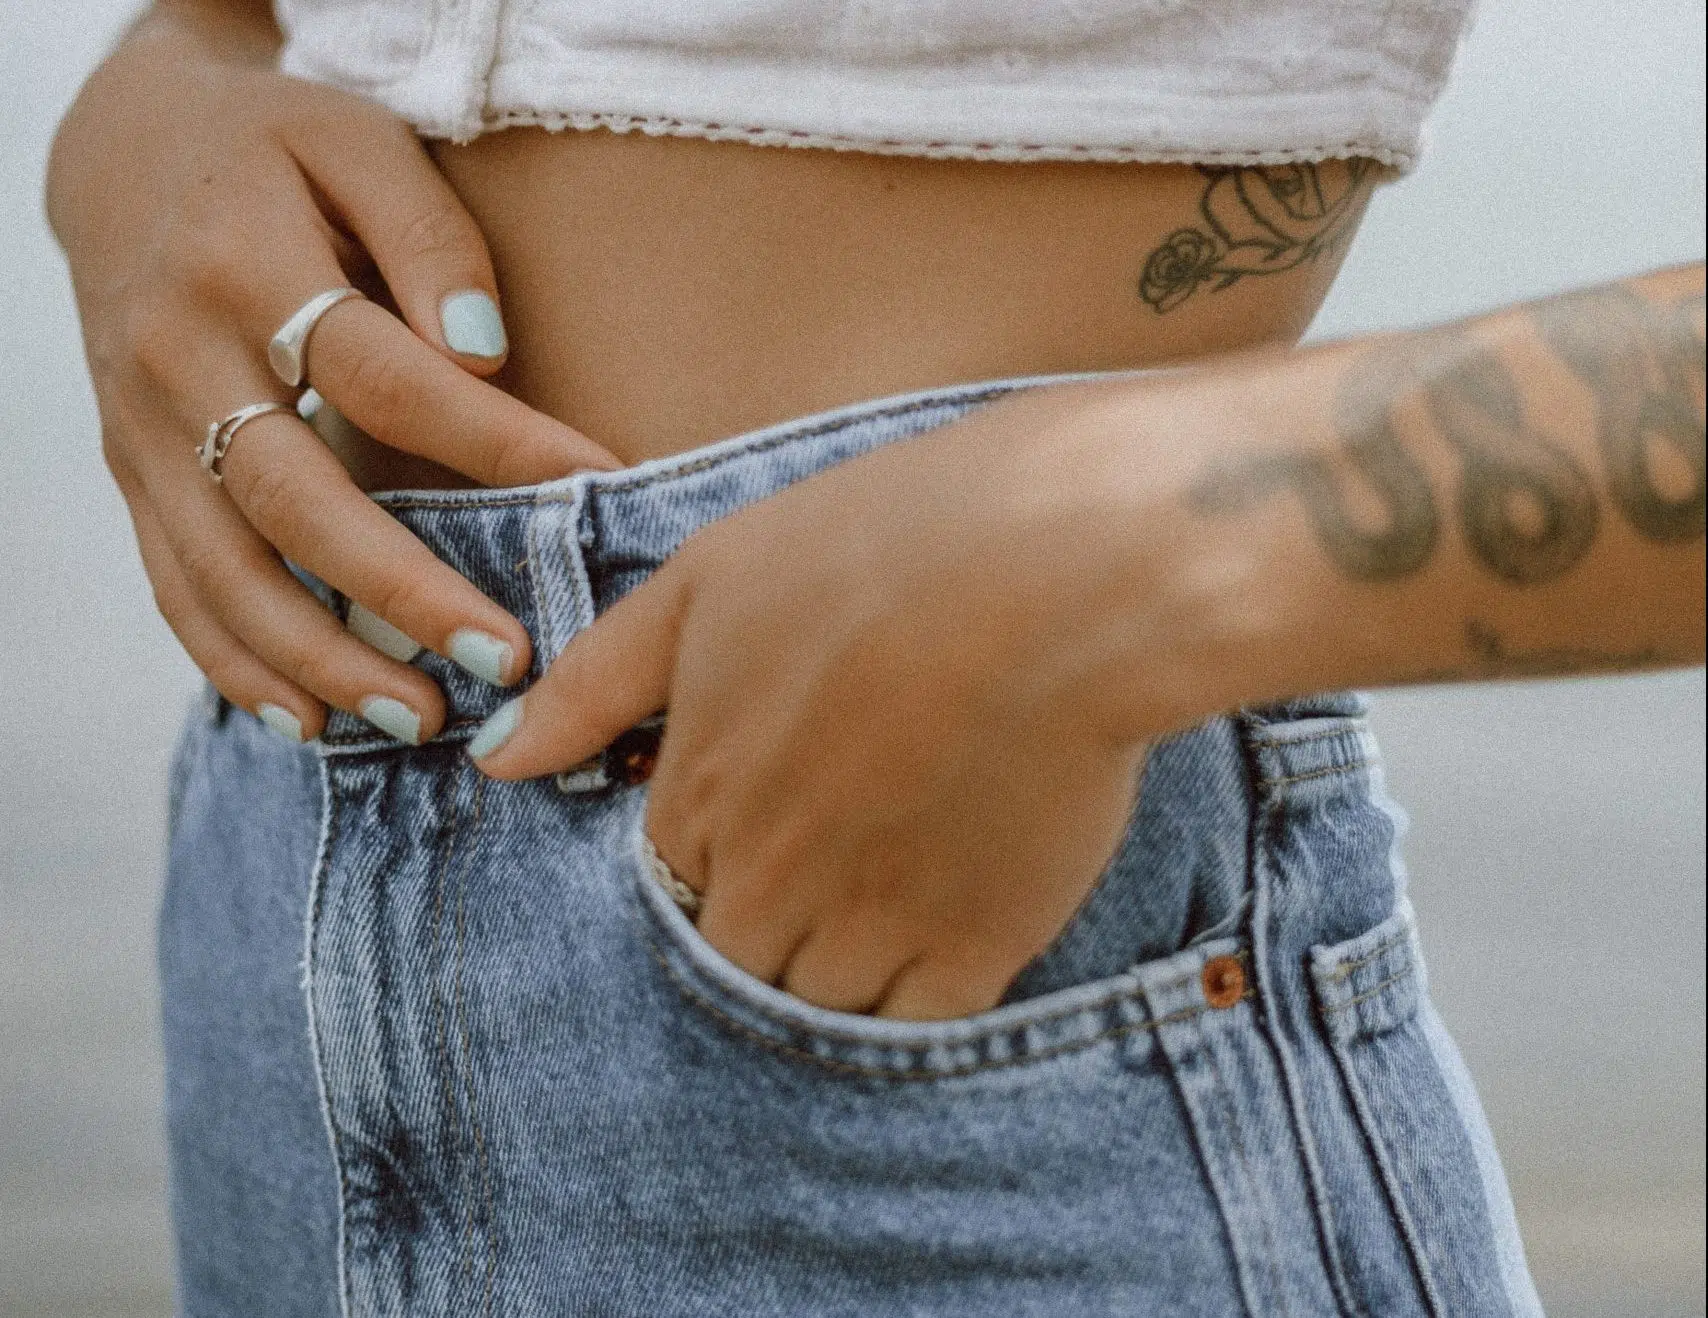 THEE key to washing your jeans